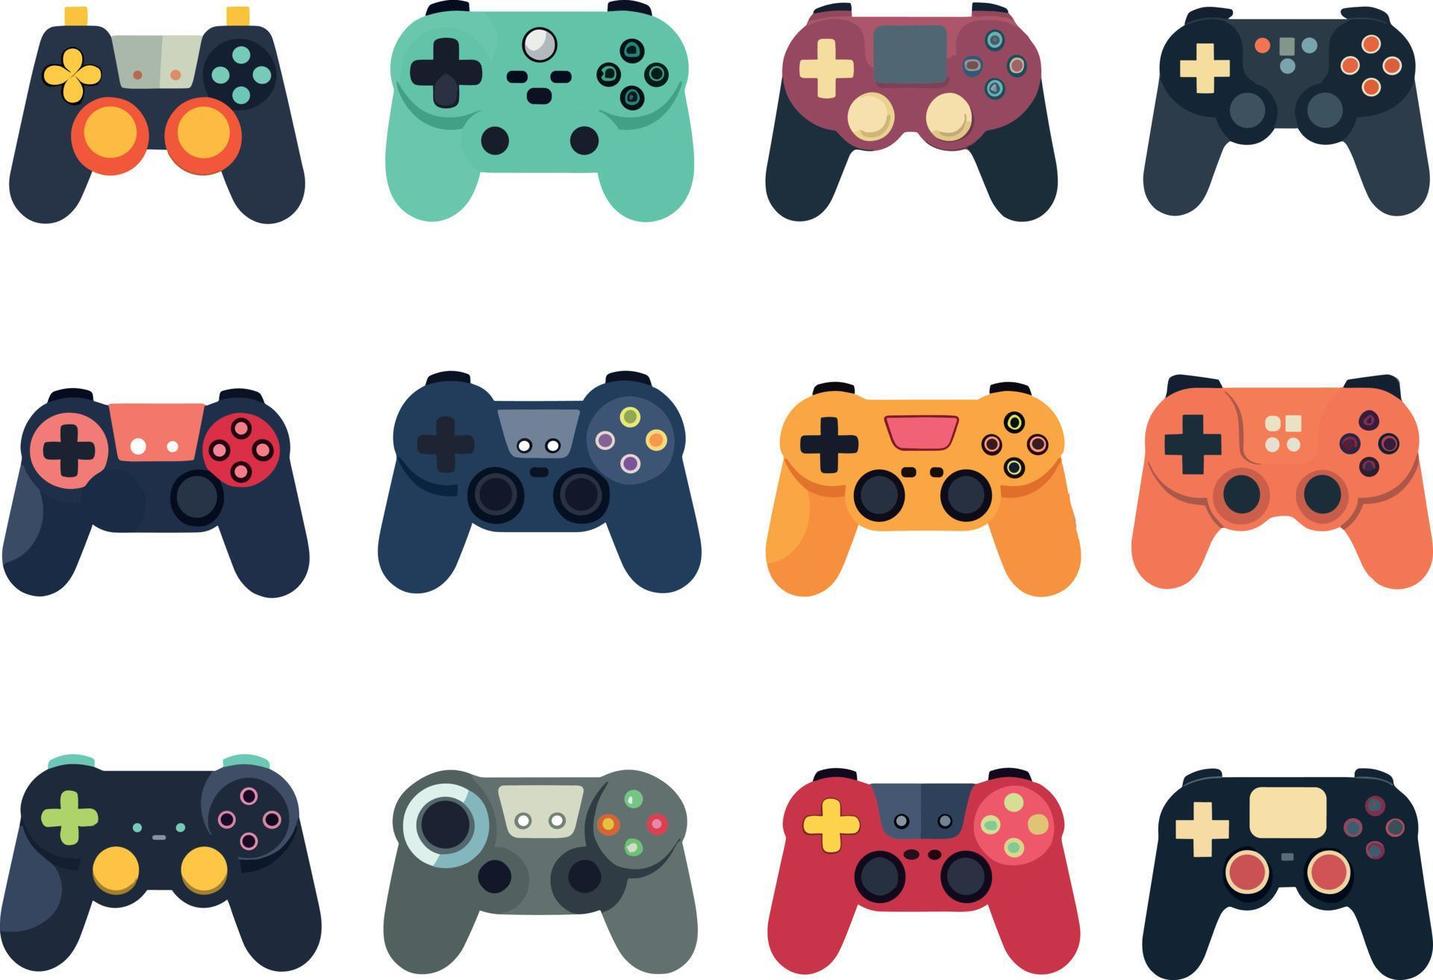 Gamepads icons set in flat style. Game controllers vector illustration.